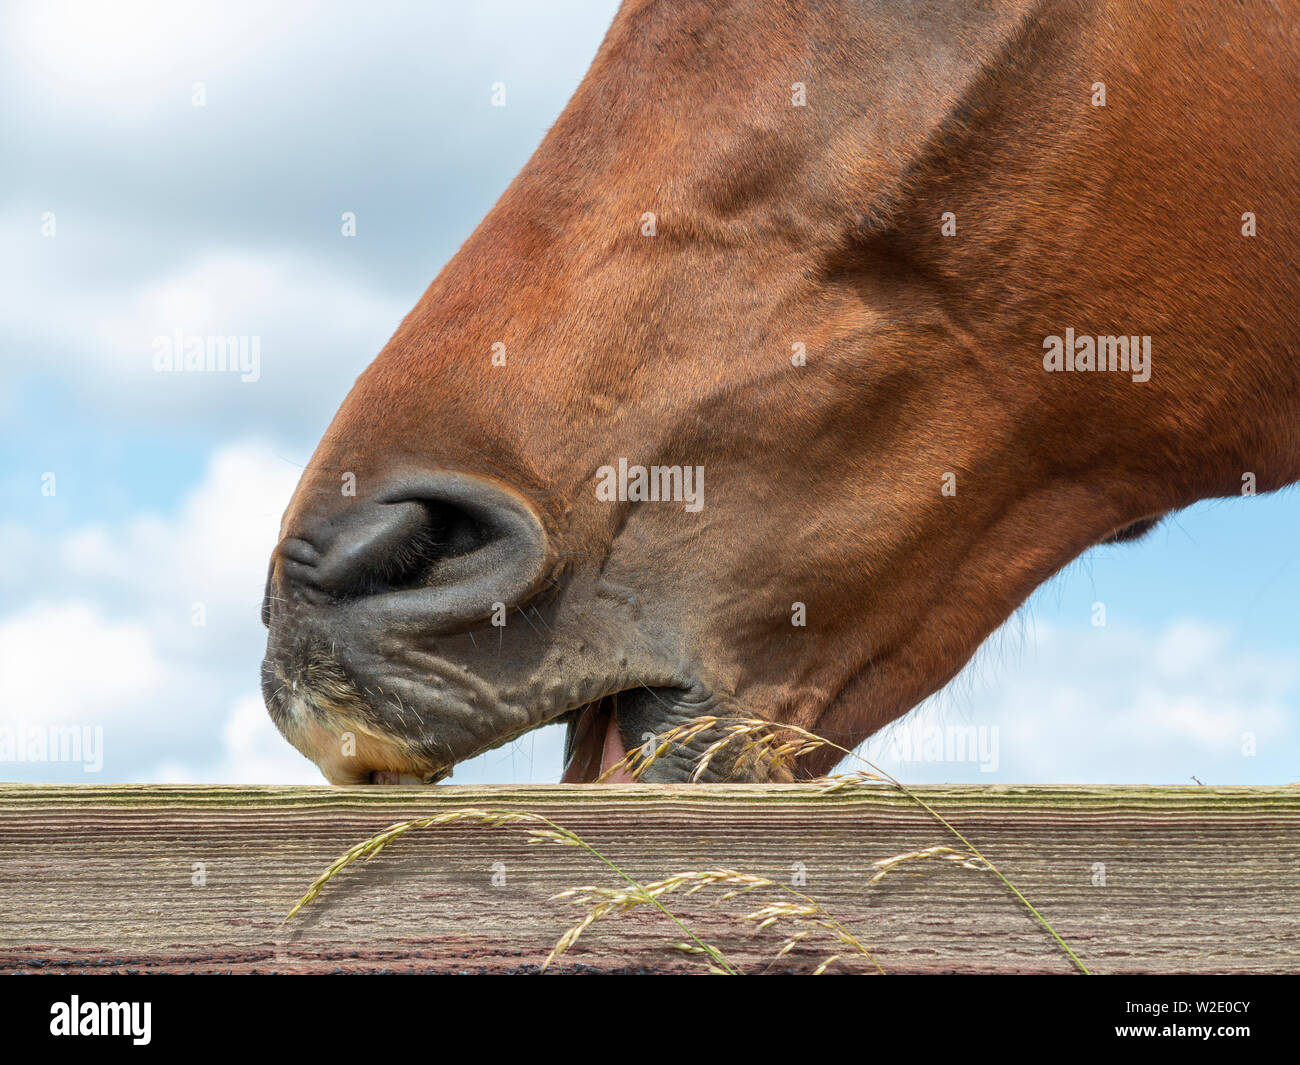 A close up of horses head showing the animal wind sucking on a fence Stock Photo